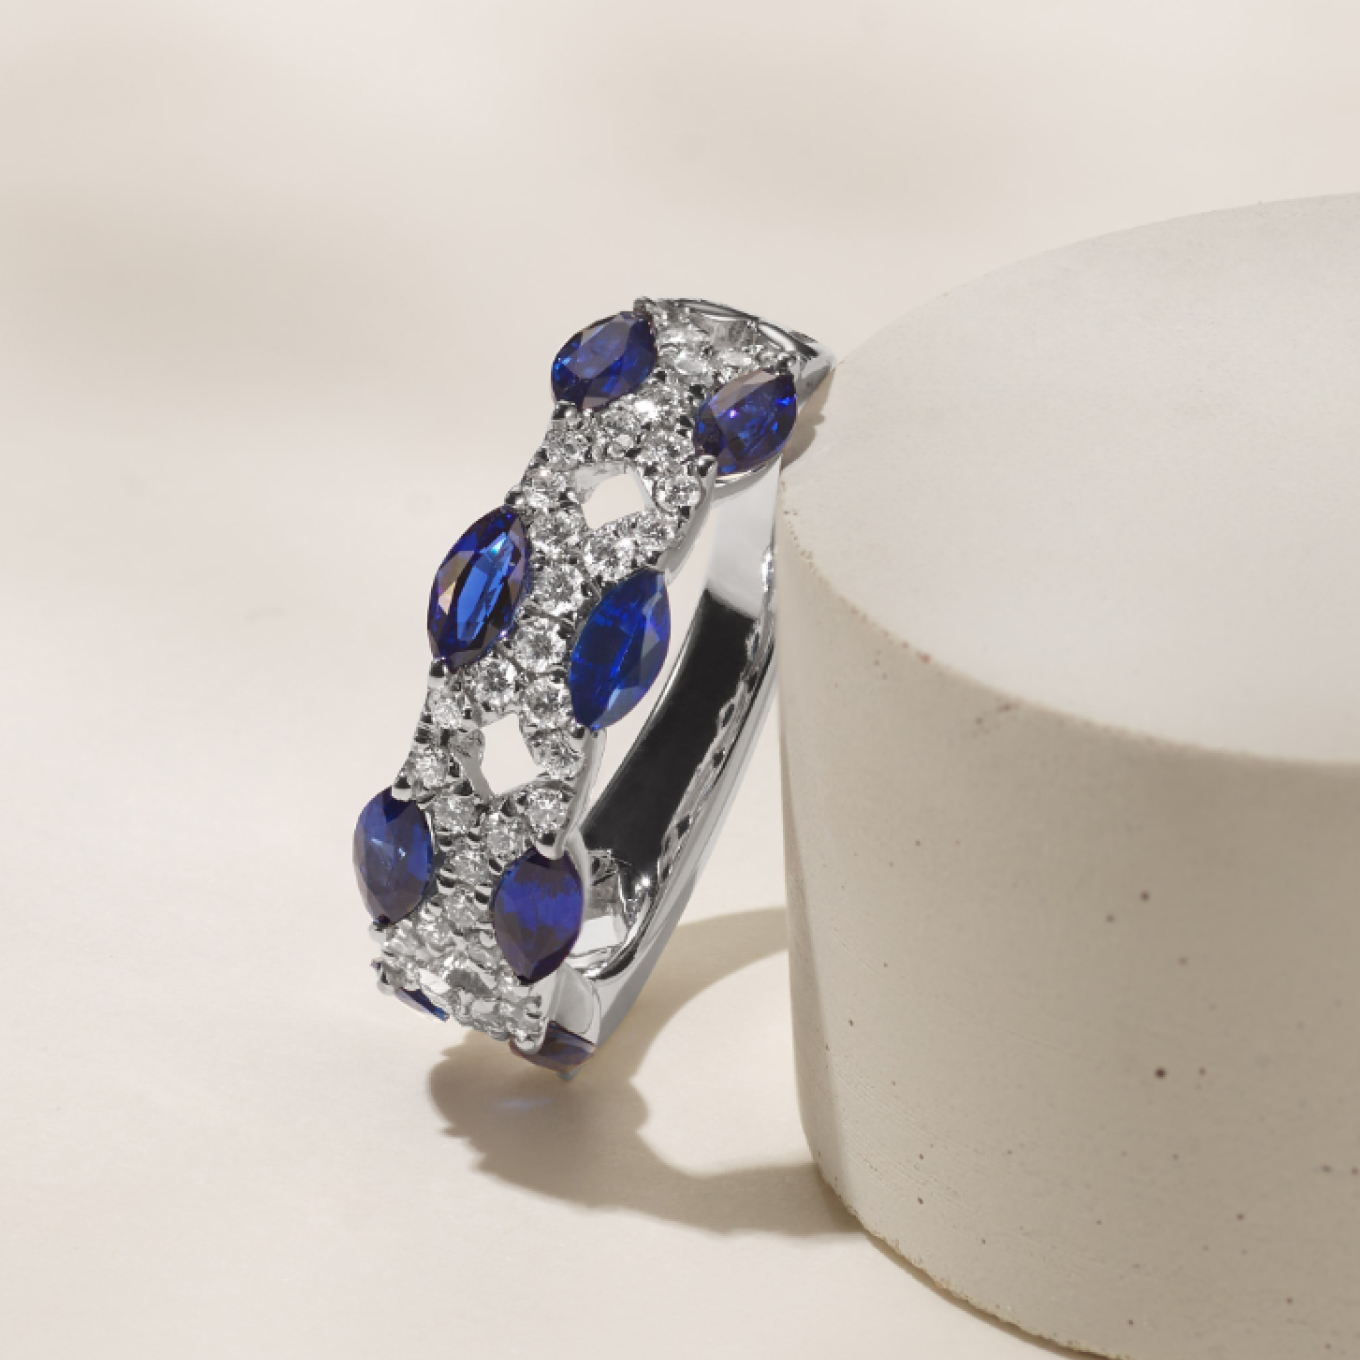 Lattice Sapphire & Diamond Band Oval natural traditional blue sapphires cling to a pavé lattice in this beautiful lacy design. Set in bright 14-karat white gold, all the gemstones in this remarkable ring are hand matched for consistent color and beauty.